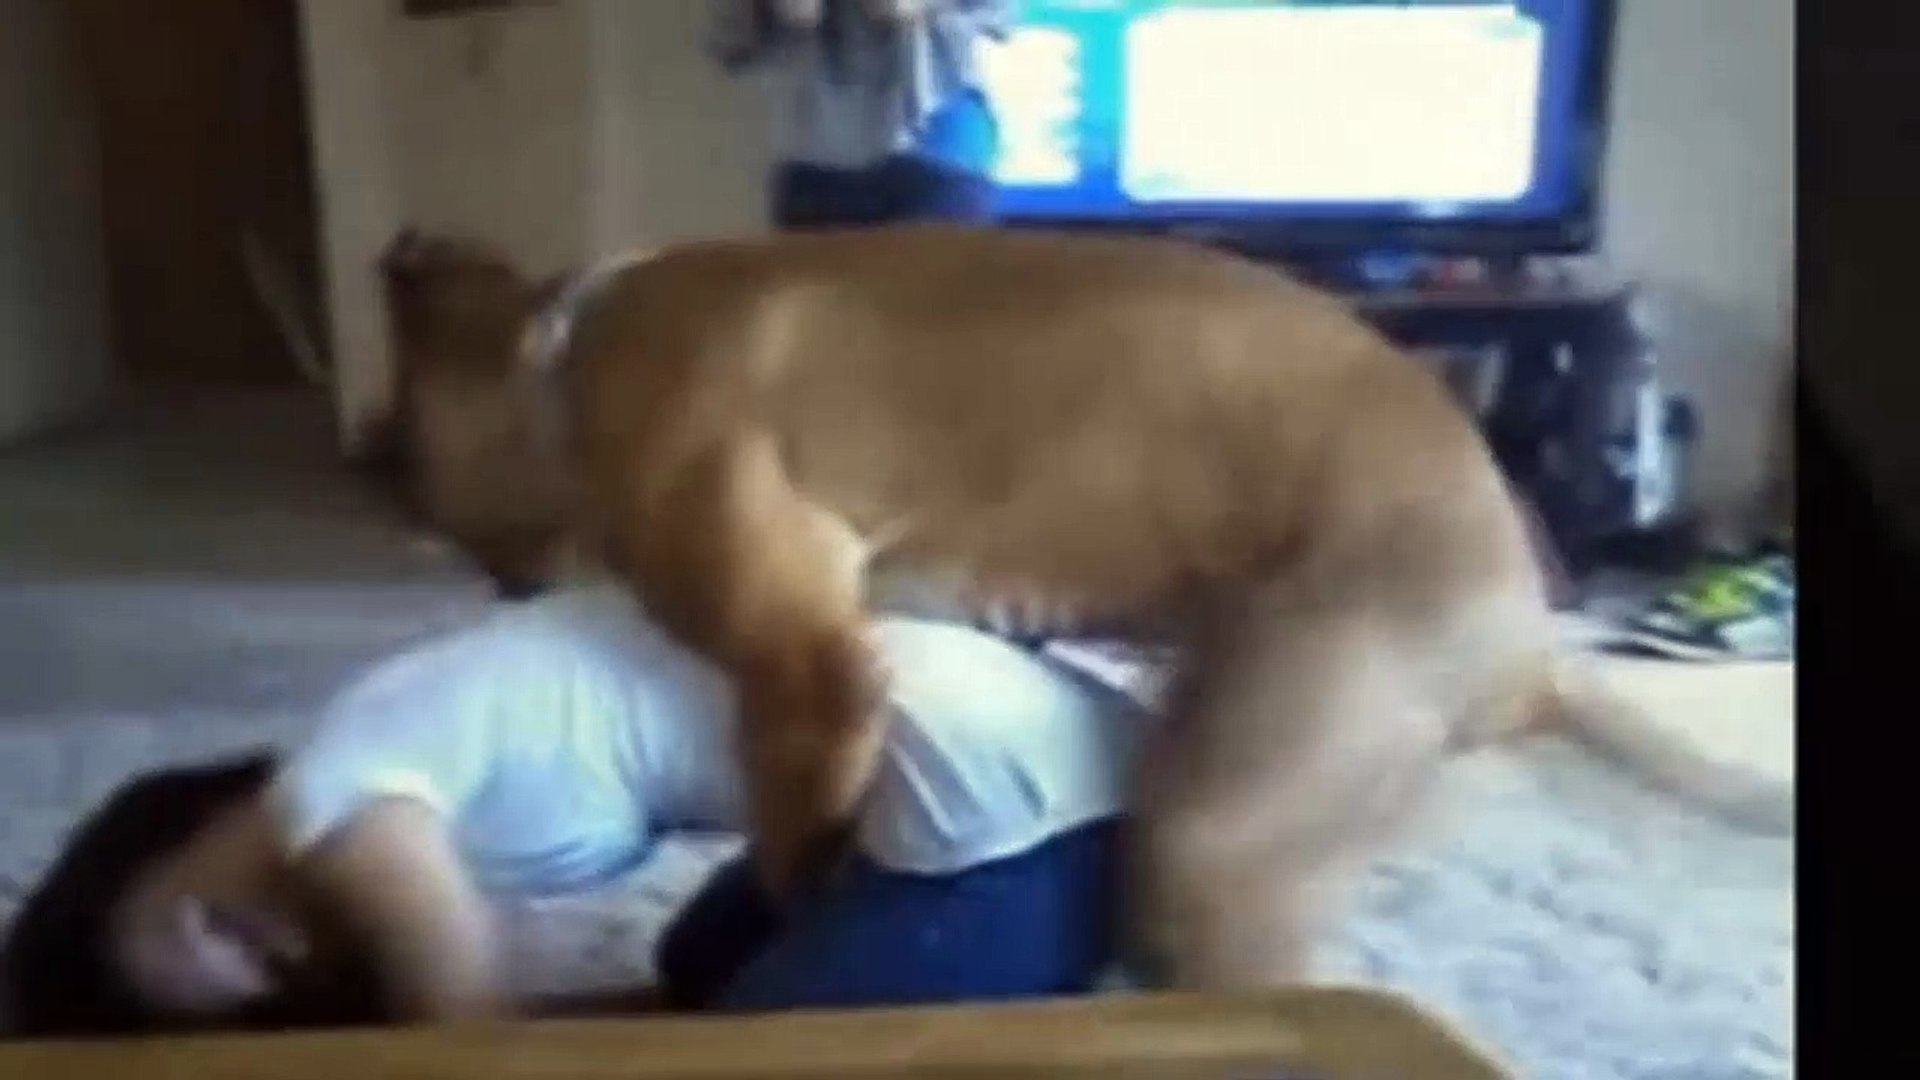 dog mating with women - Video Dailymotion